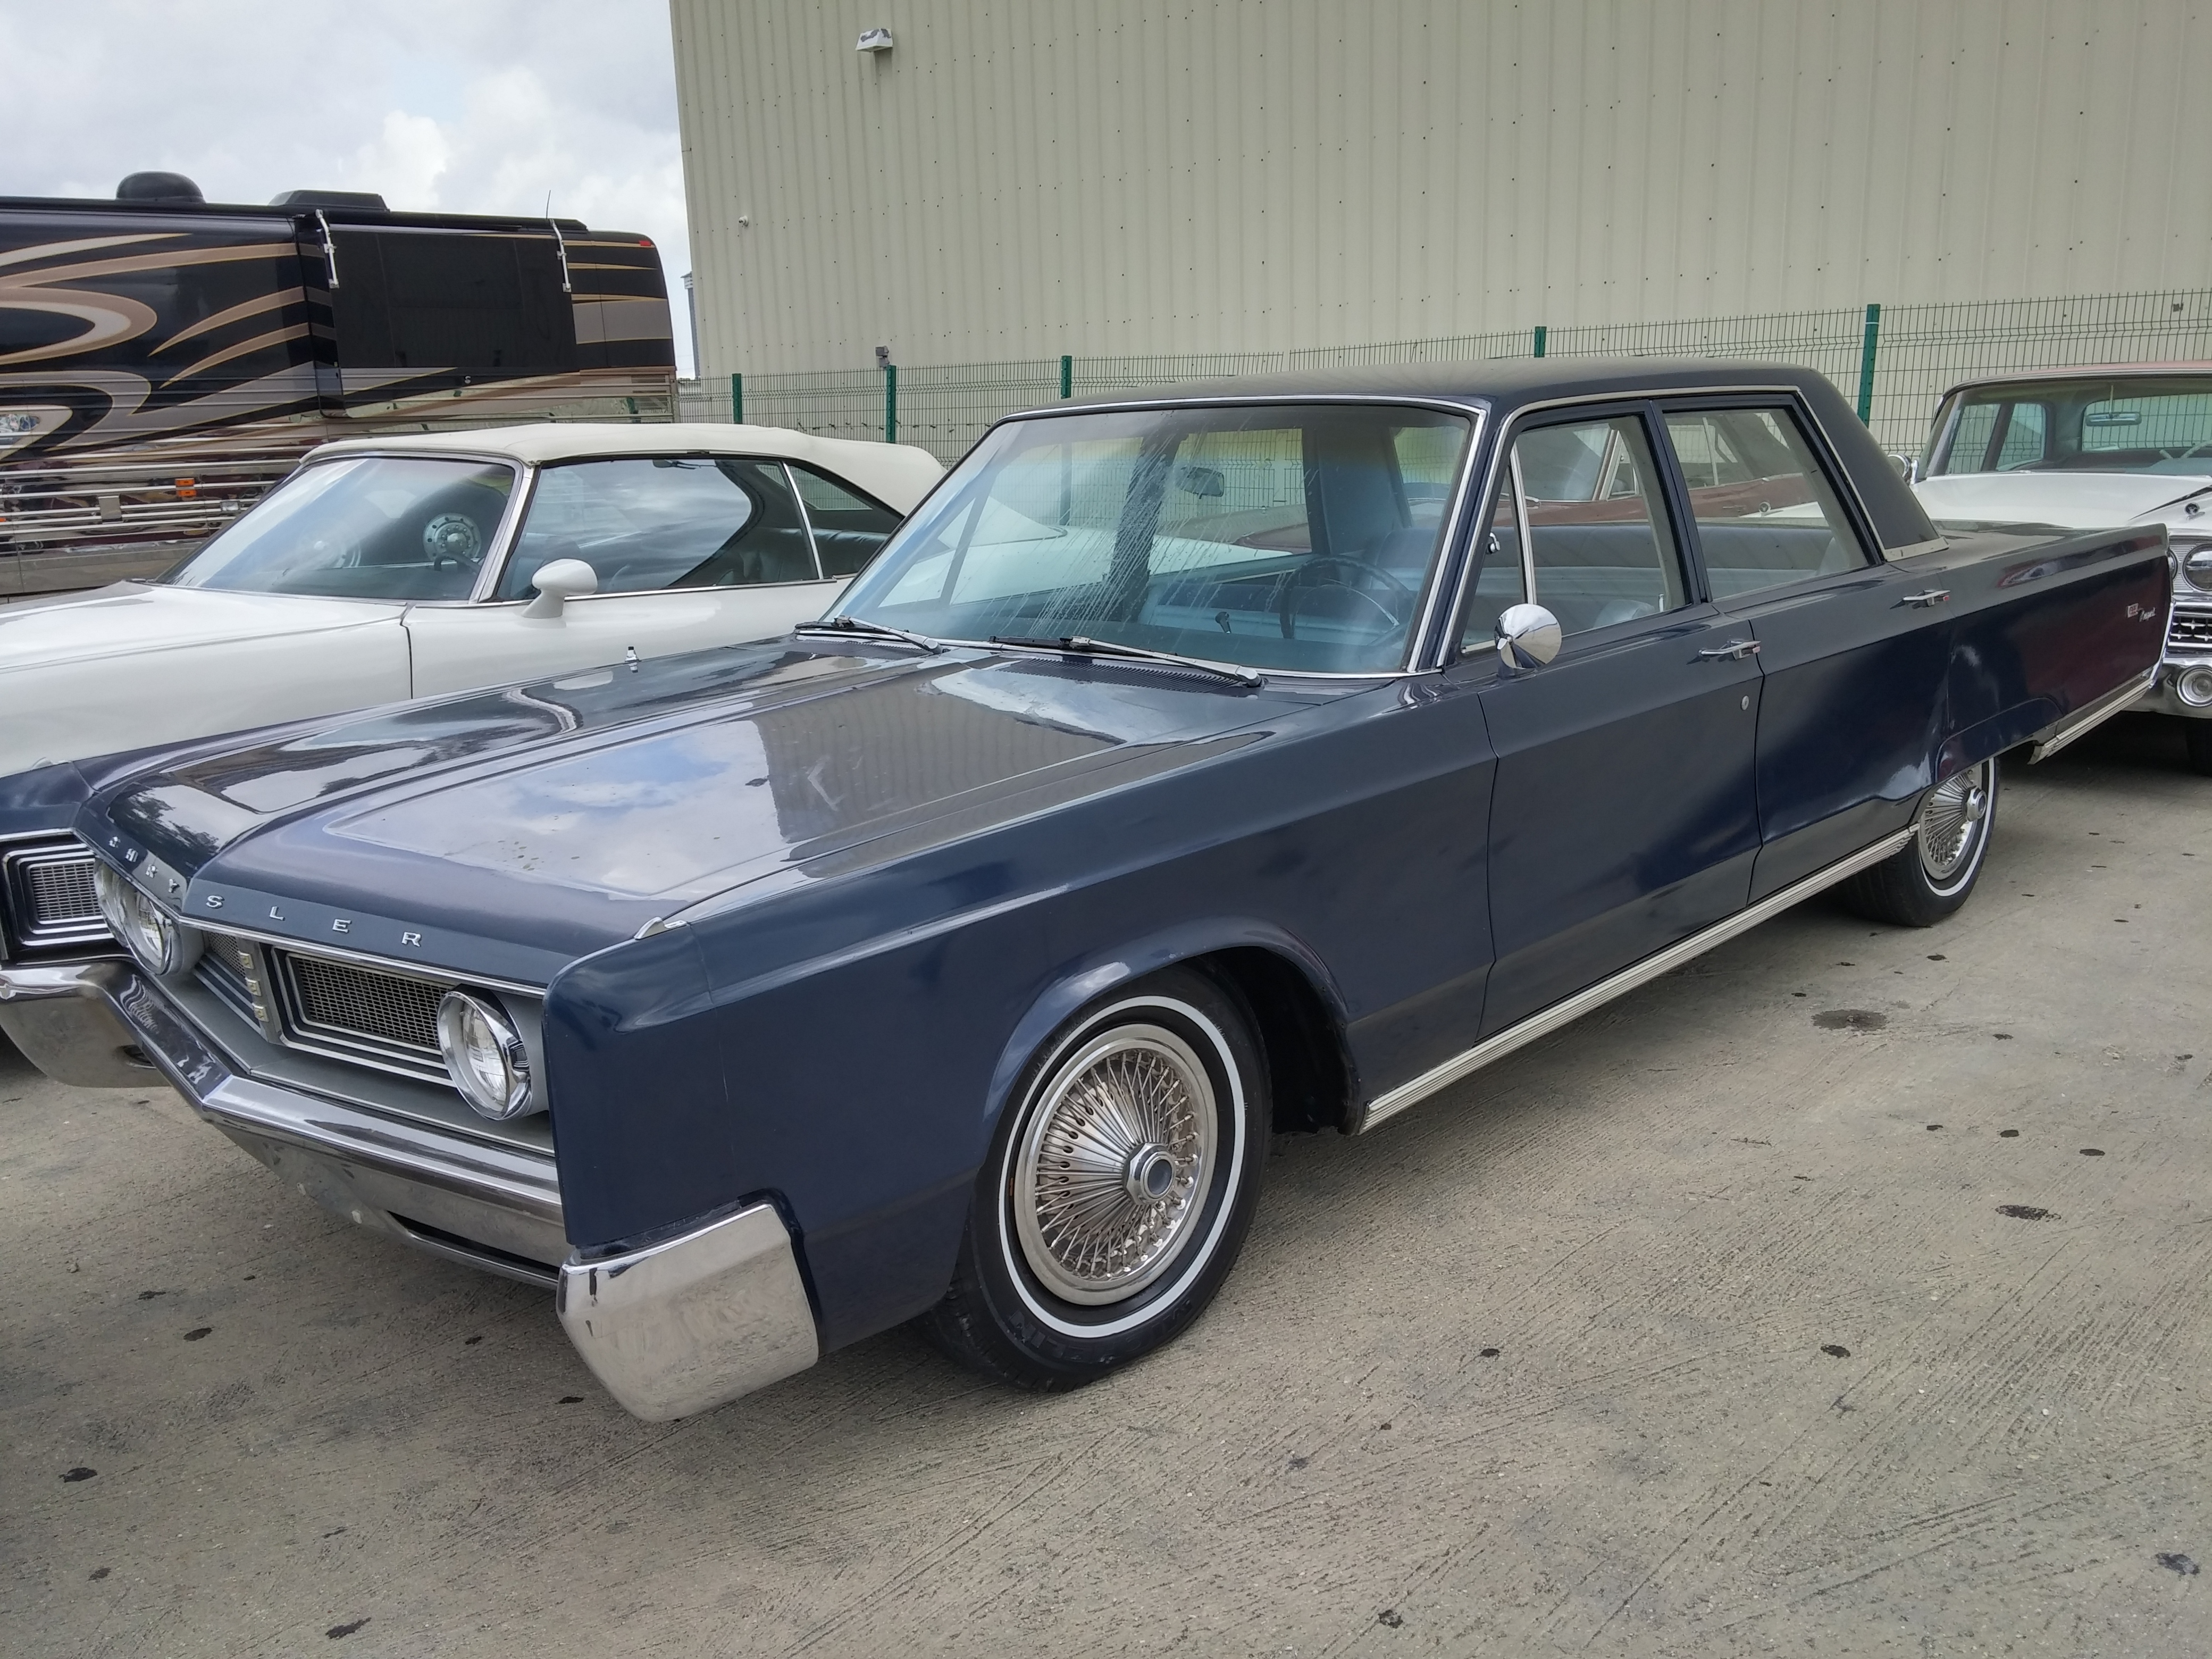 0th Image of a 1967 CHRYSLER 773